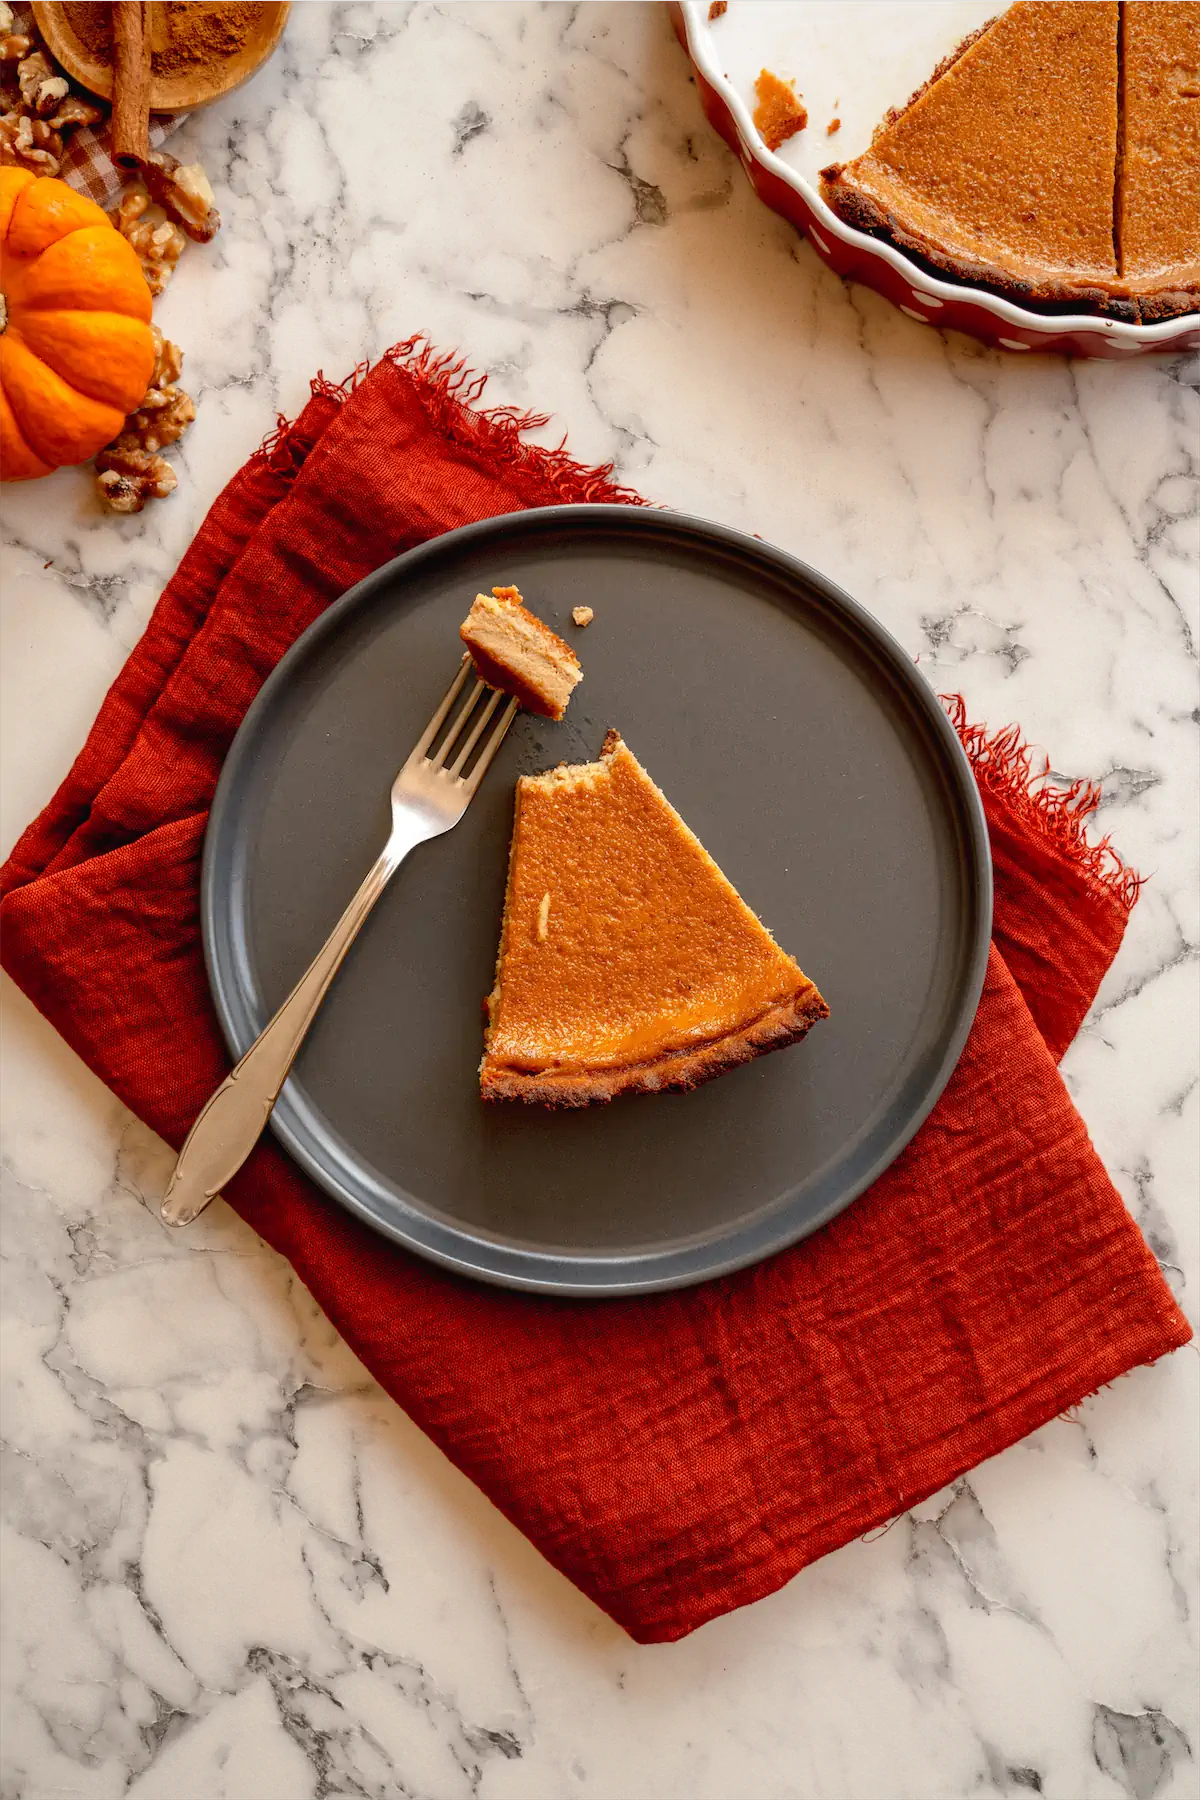 A slice of keto pumpkin pie served on a plate, with a morsel of pie on the fork.